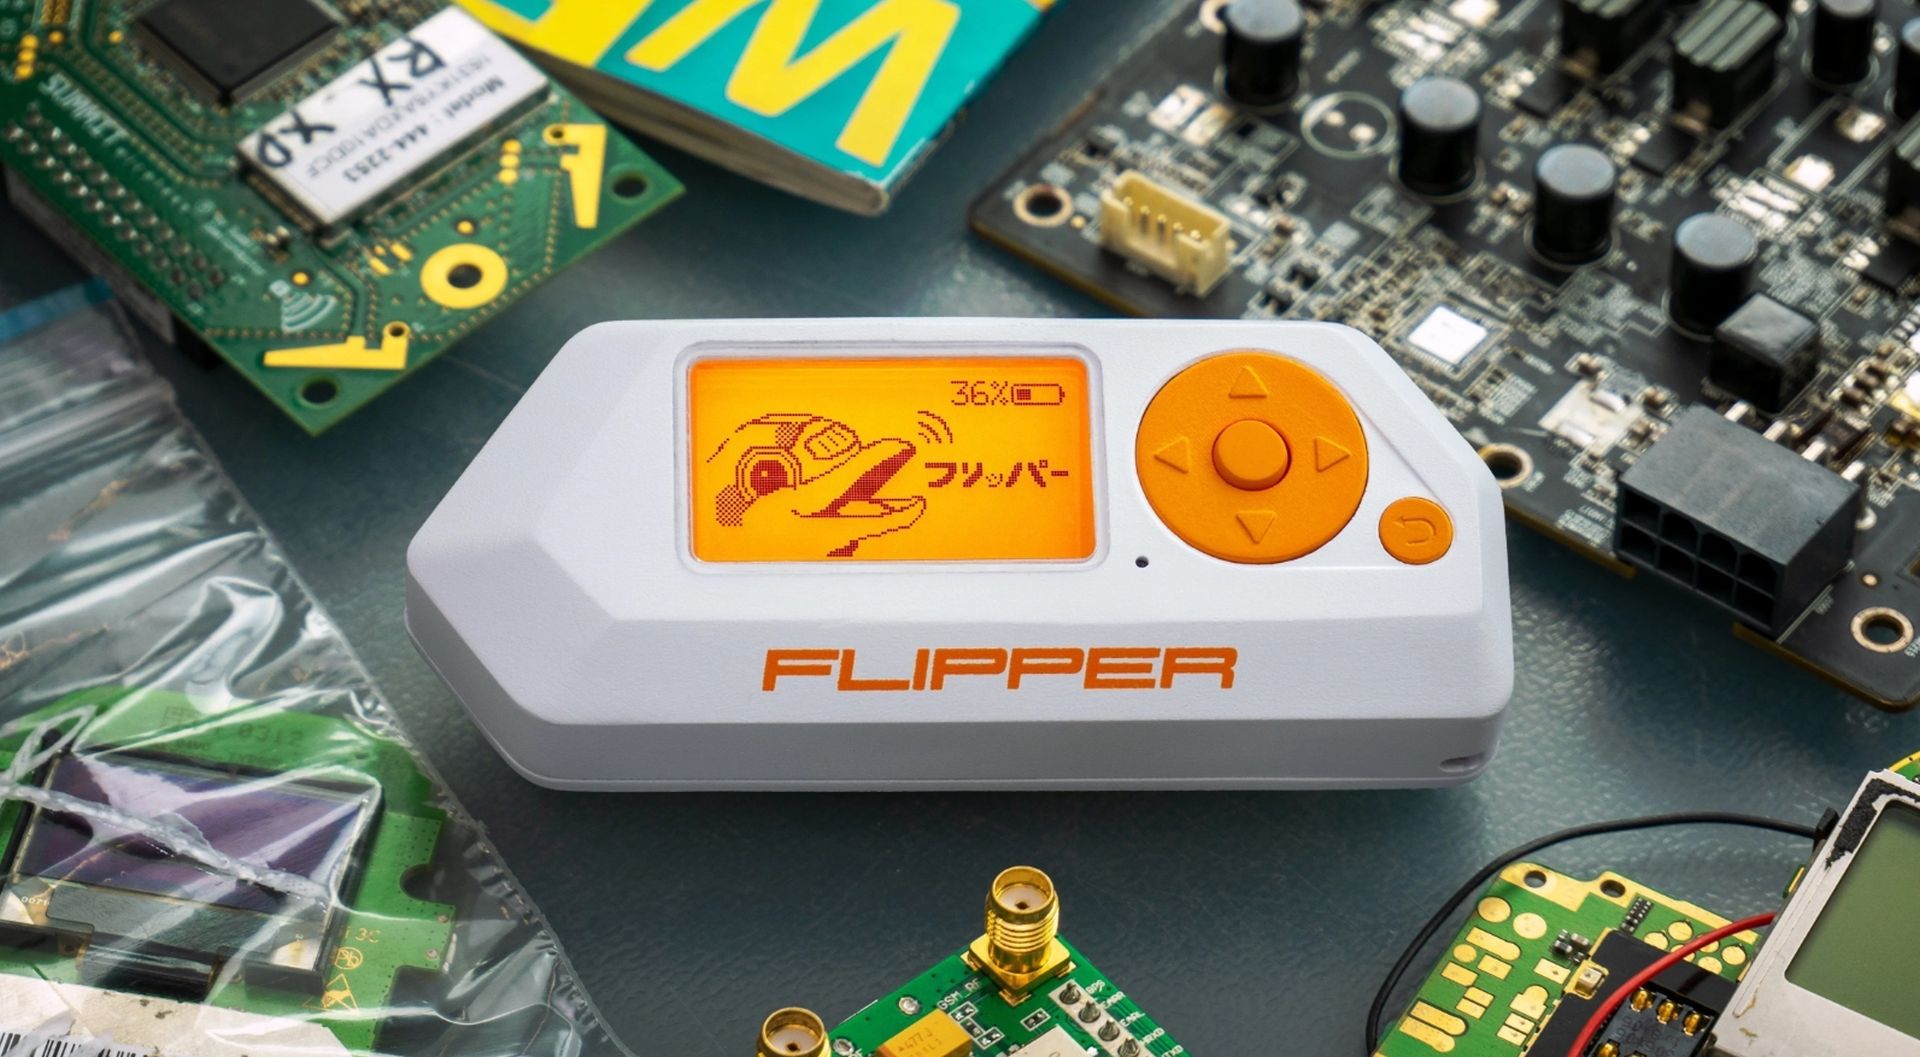 Beware, Flipper Zero might spam you with Bluetooth alerts